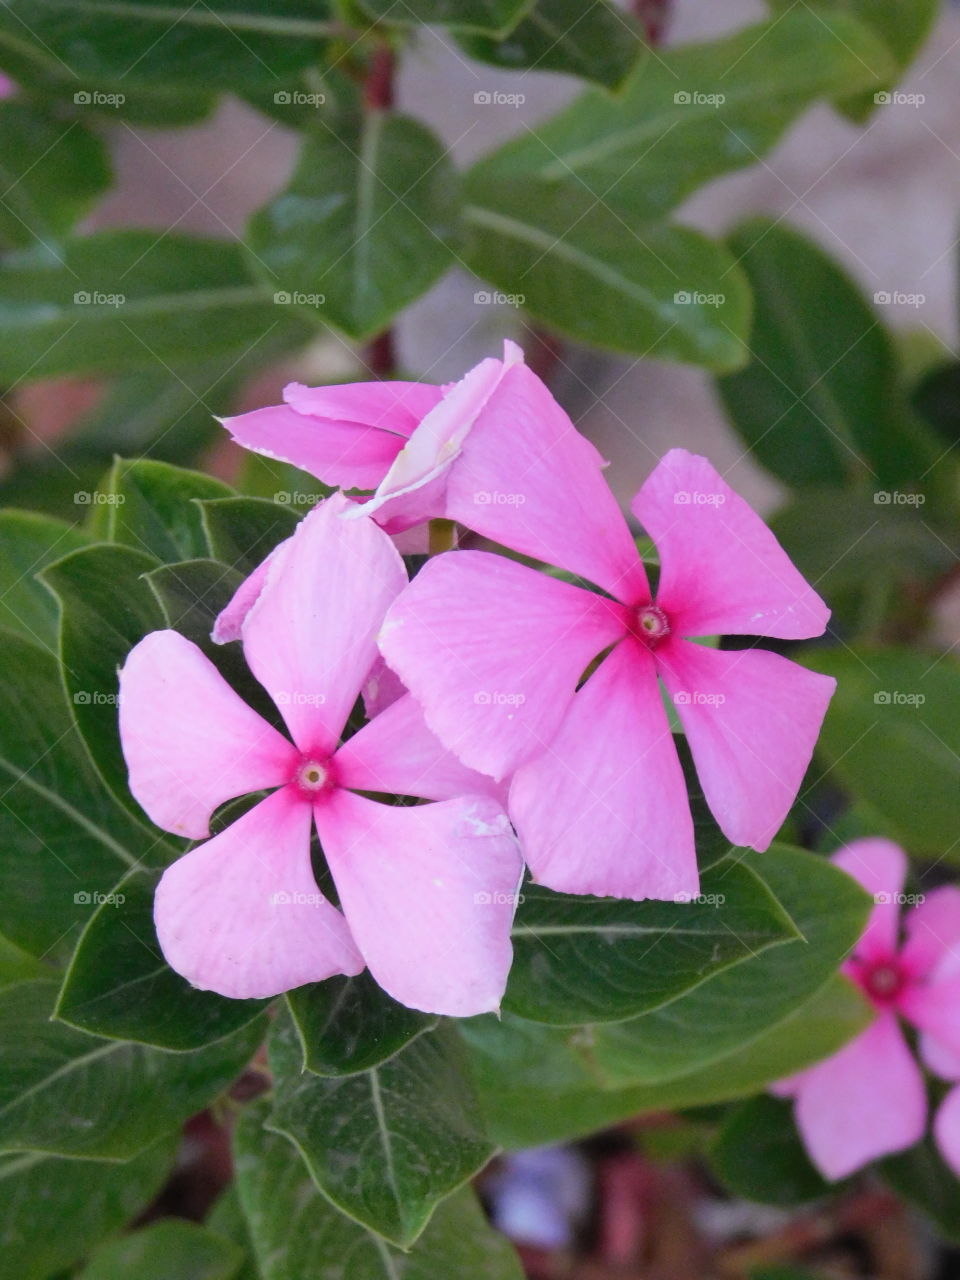 Pink Flowers - Vinca is a genus of flowering plants in the family Apocynaceae, native to Europe, northwest Africa and southwest Asia. The English name periwinkle is shared with the related genus Catharanthus roseus.